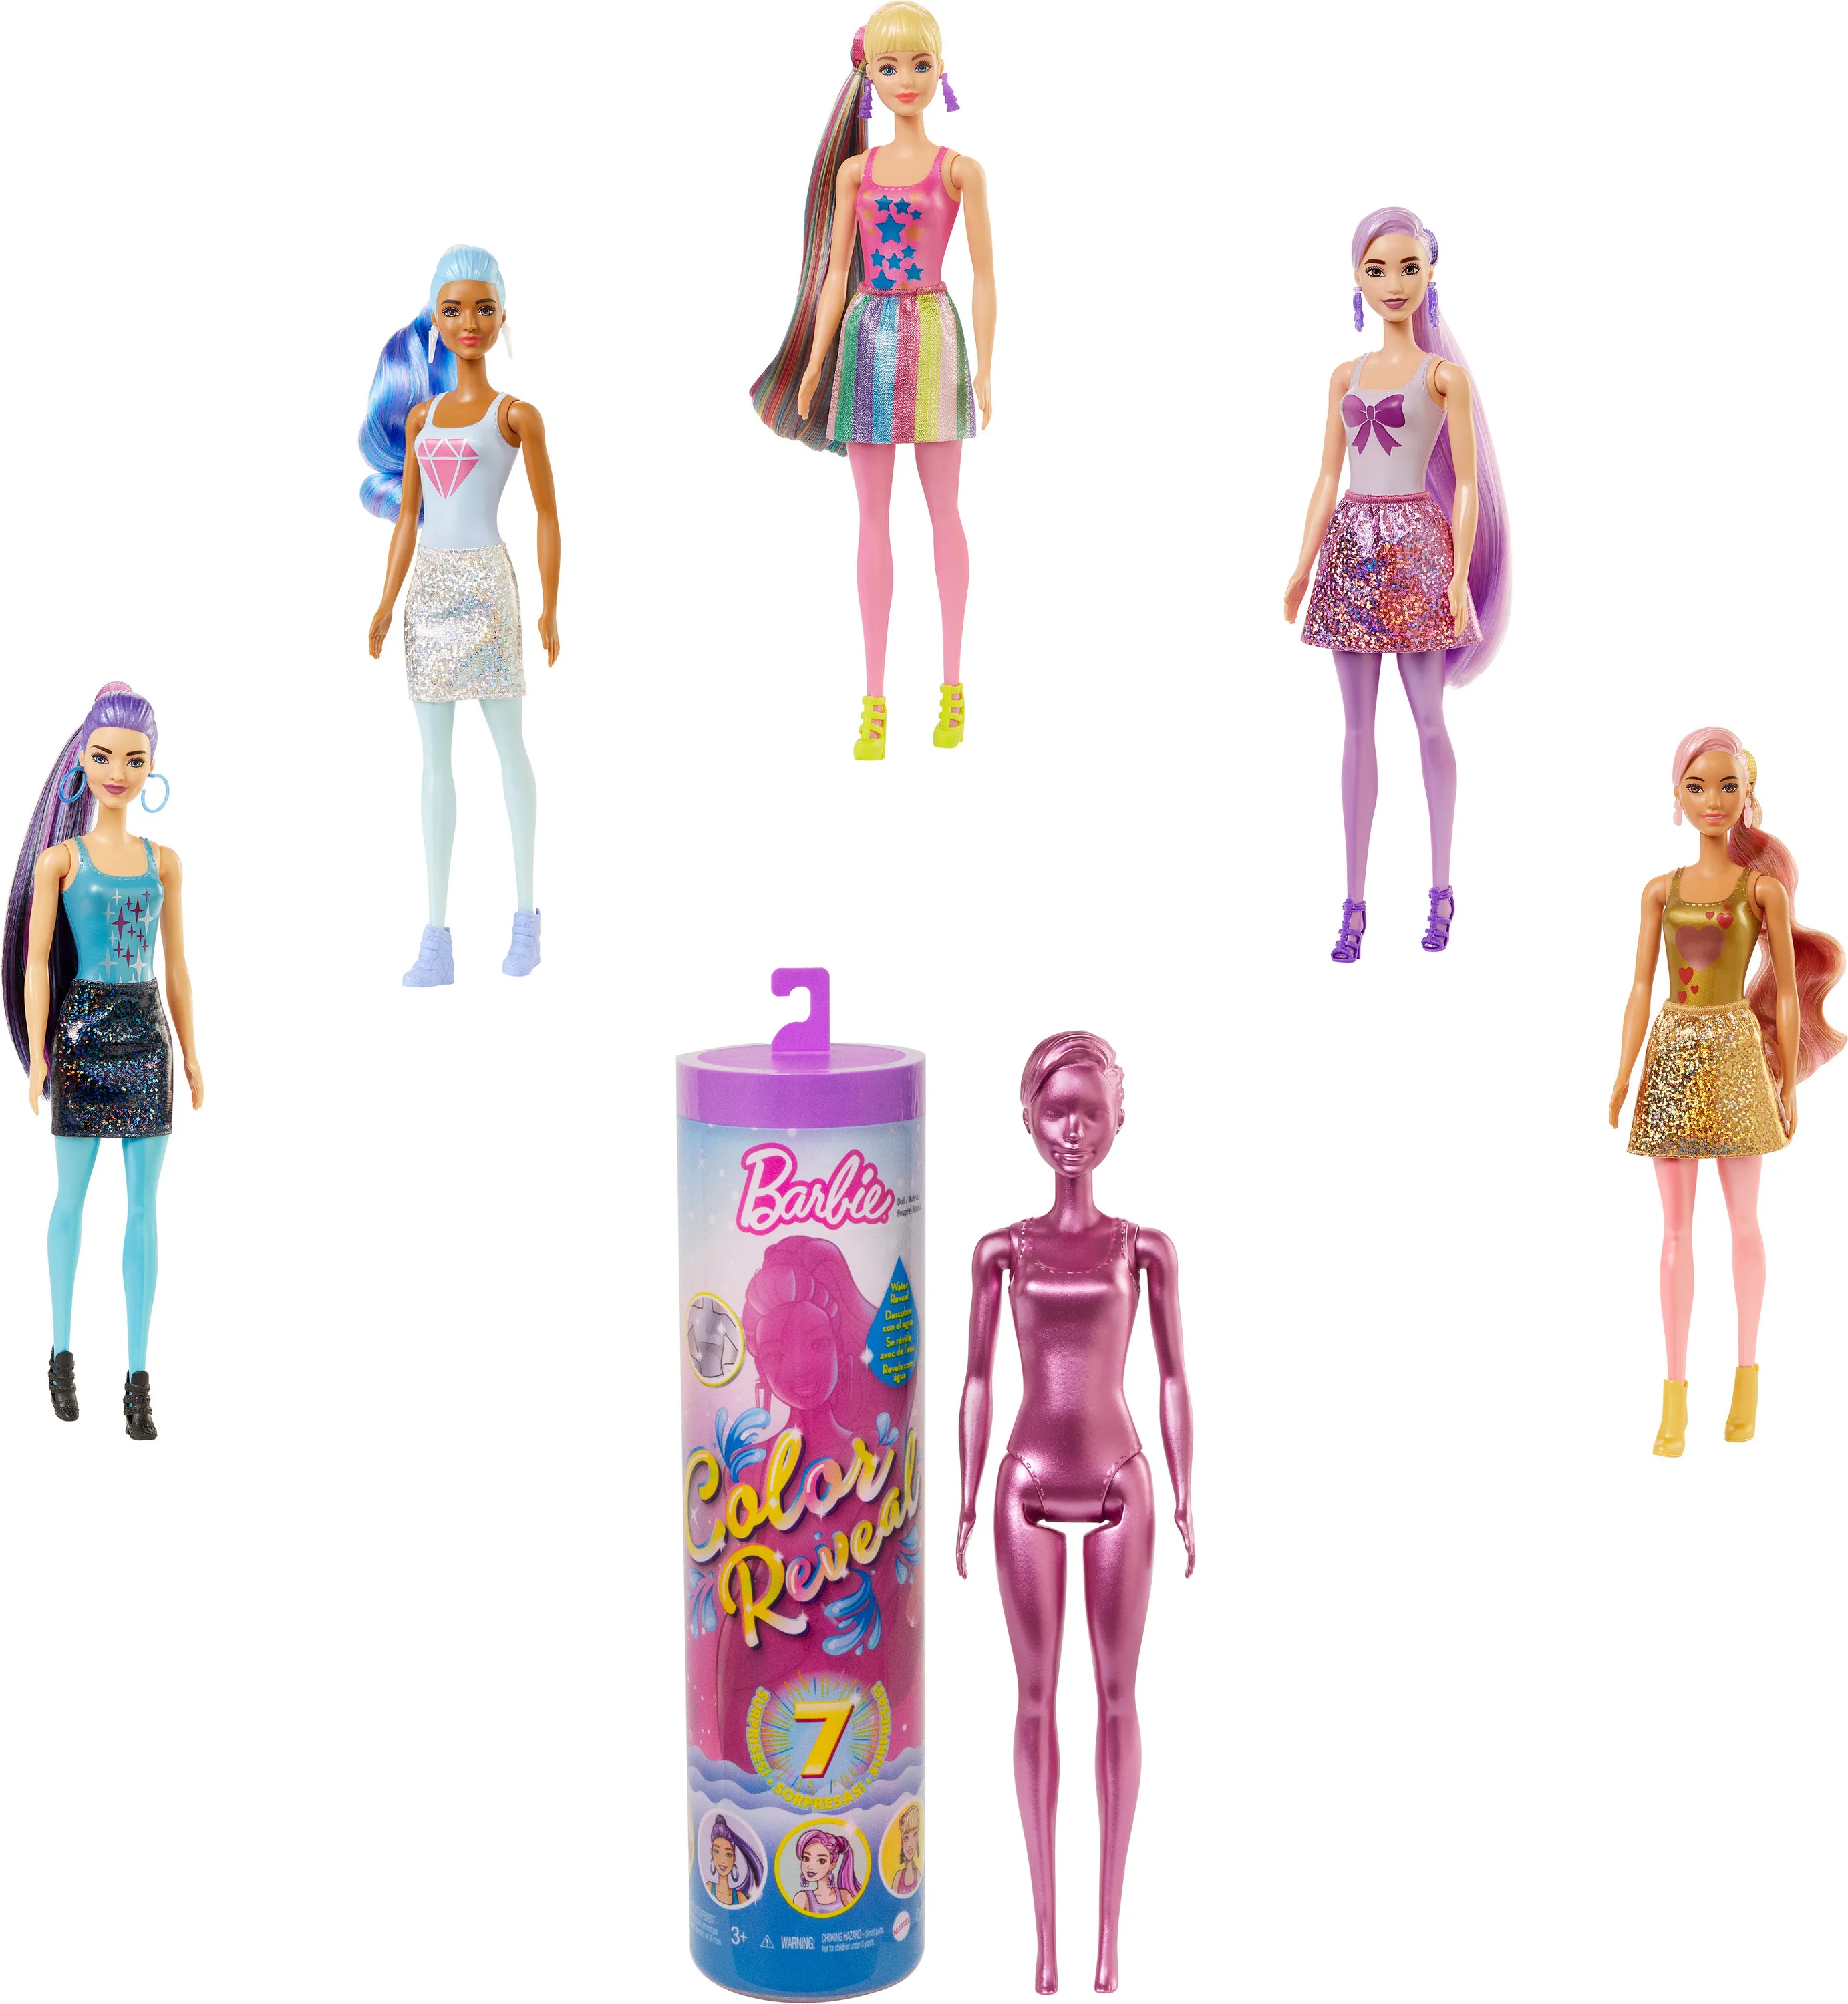 

Original Barbie Color Reveal Doll with 7 Surprises Water Reveals Color Change on Face Top Brand Toys for Girls Christmas Gifts